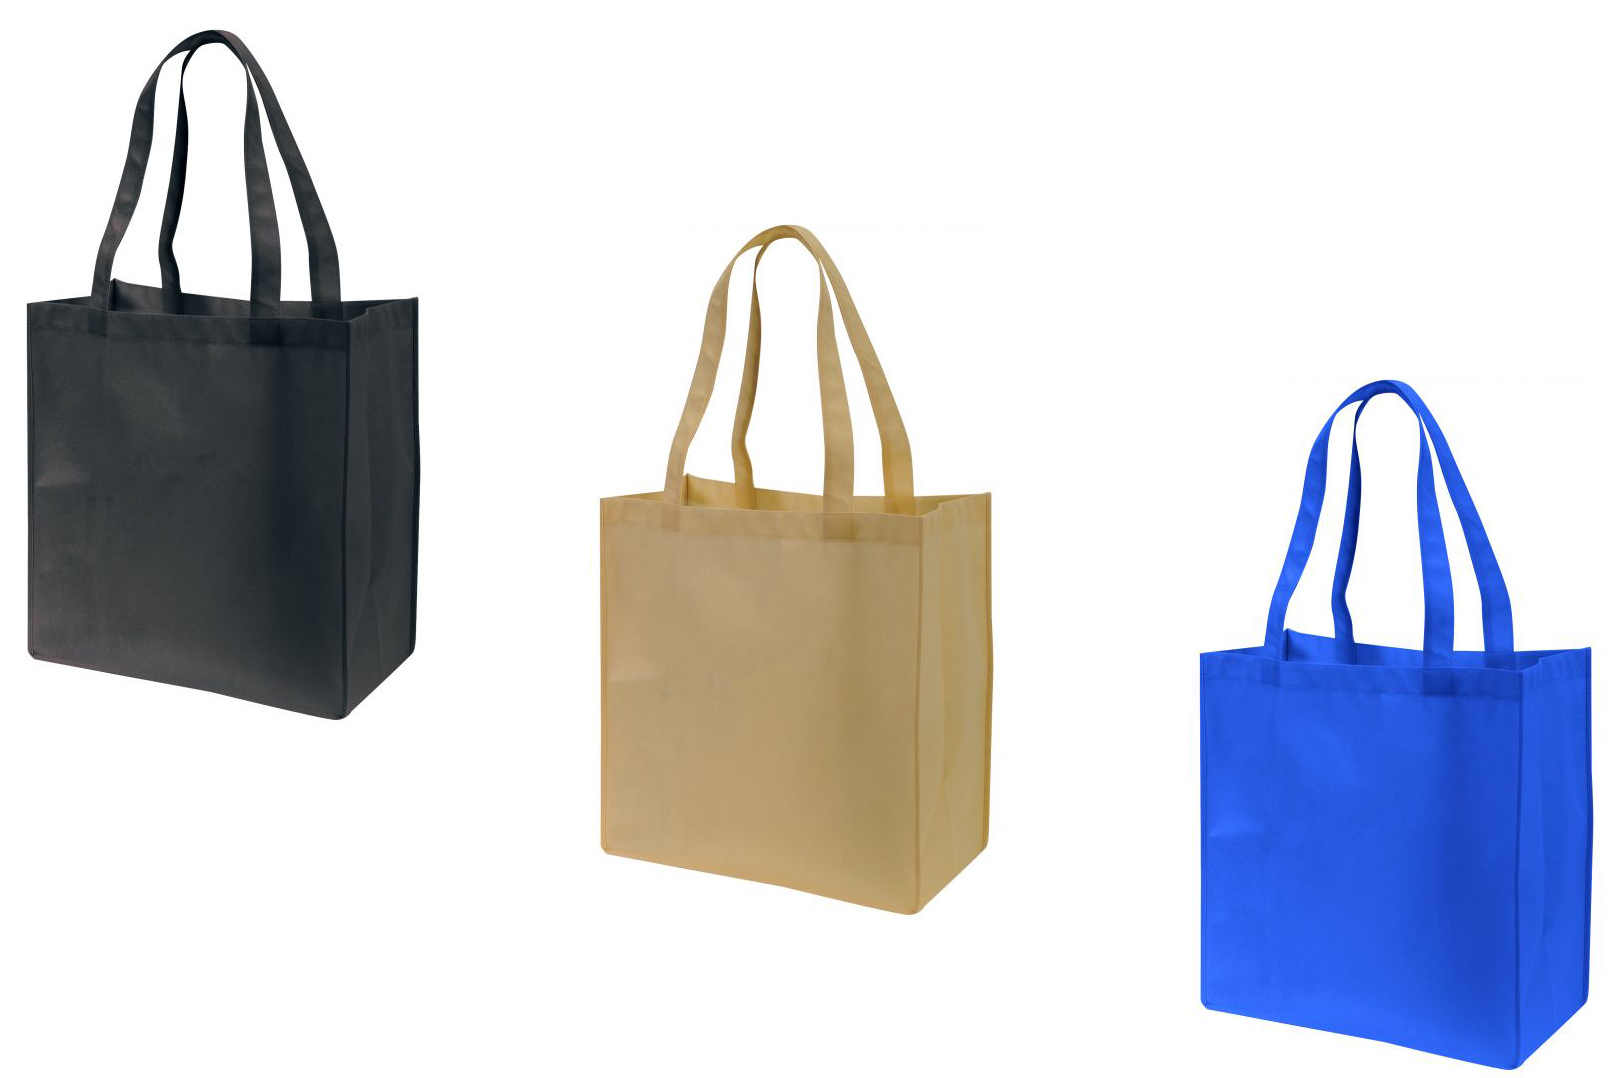 ''12'''' Non-Woven Tote Bags w/ Dual Carrying Handles - Choose Your Color(s)''